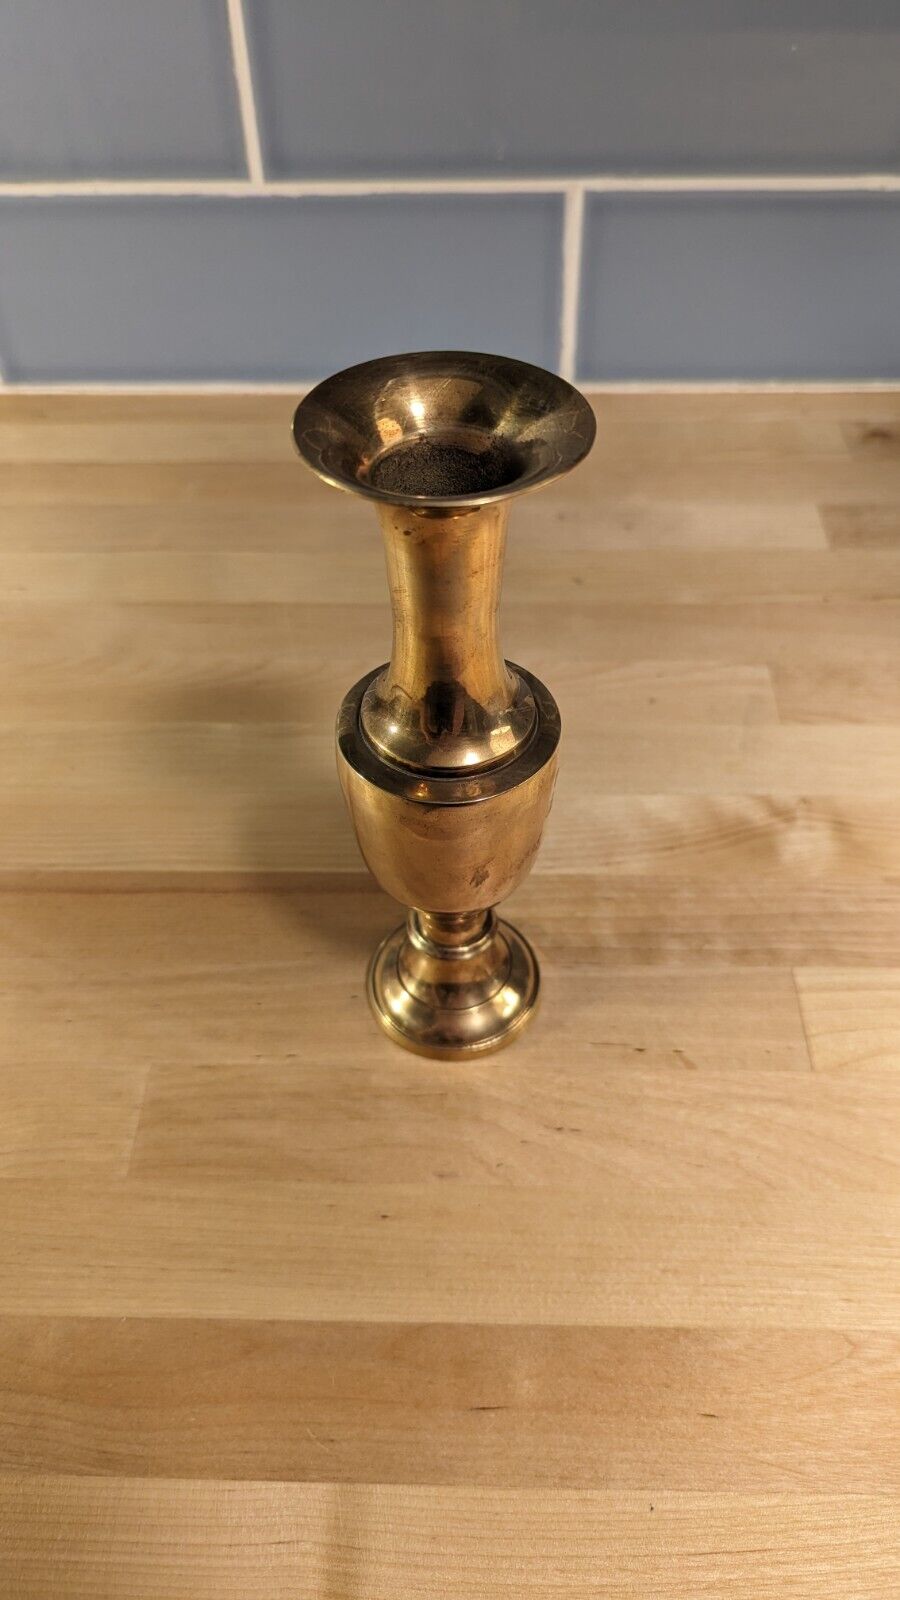 Elegant Indian Polished Brass Footed Bud Vase - Handcrafted in India (7.5 x 2.5)